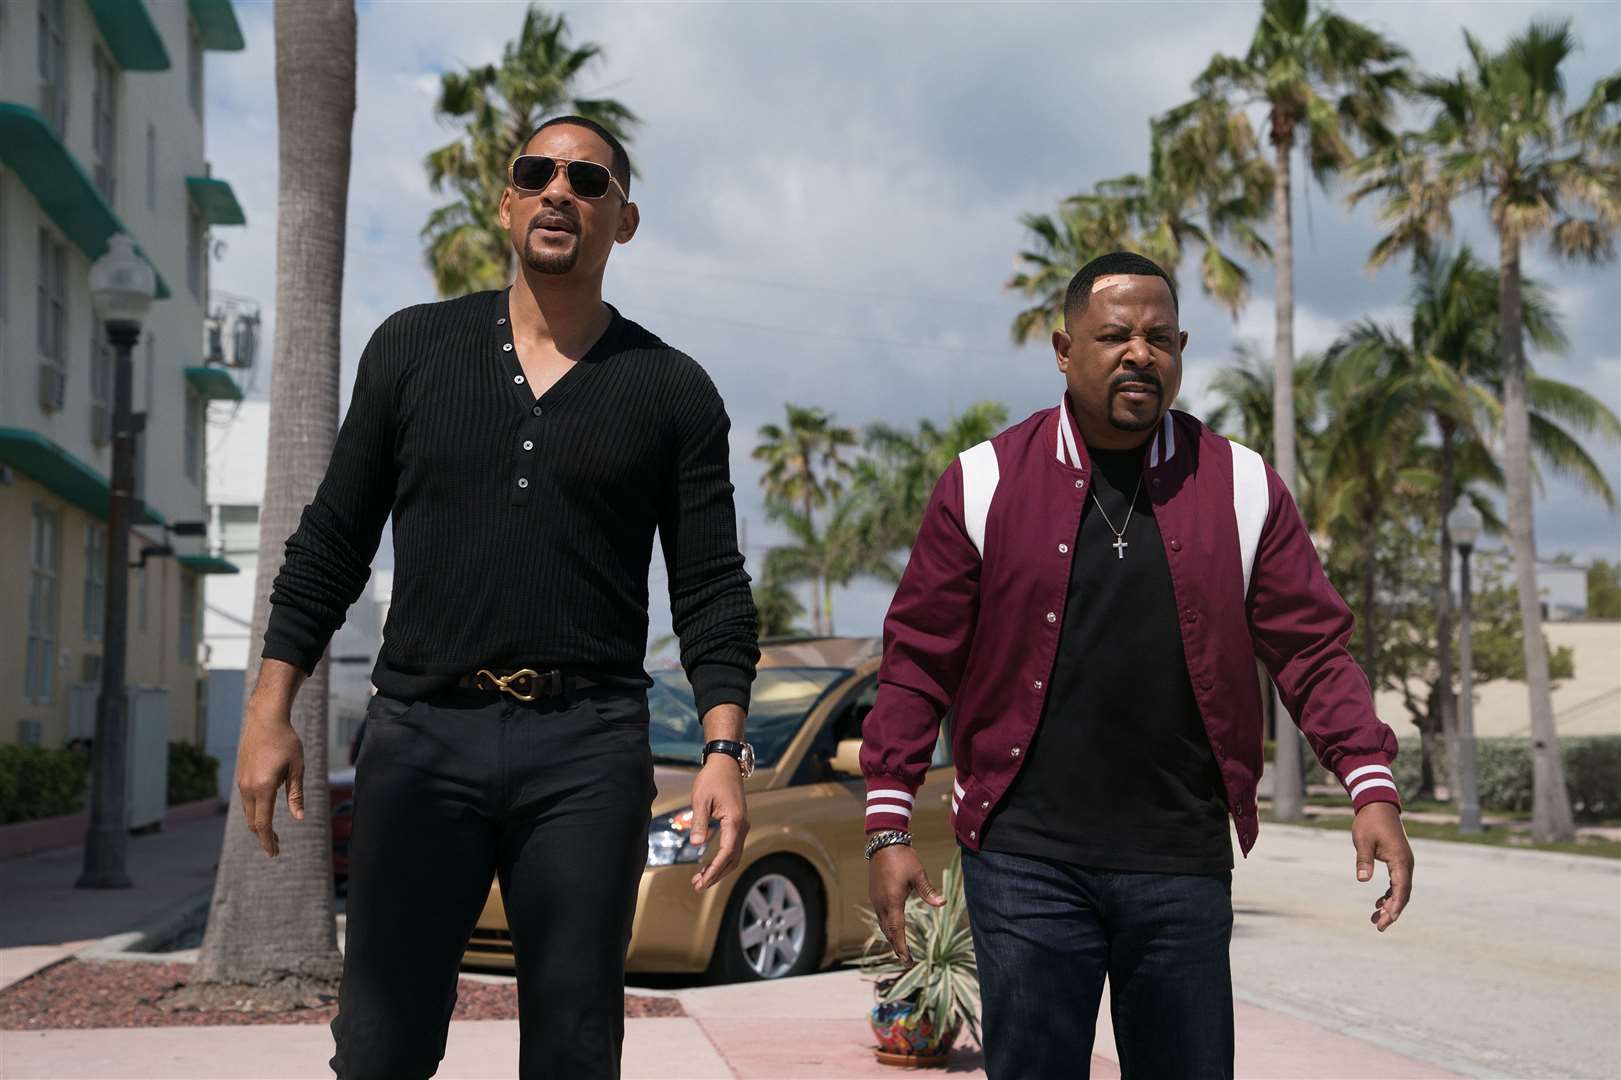 Bad Boys For Life. Pictured: Will Smith as Mike Lowrey and Martin Lawrence as Marcus Burnett Picture: PA Photo/CTMG, Inc./Ben Rothstein